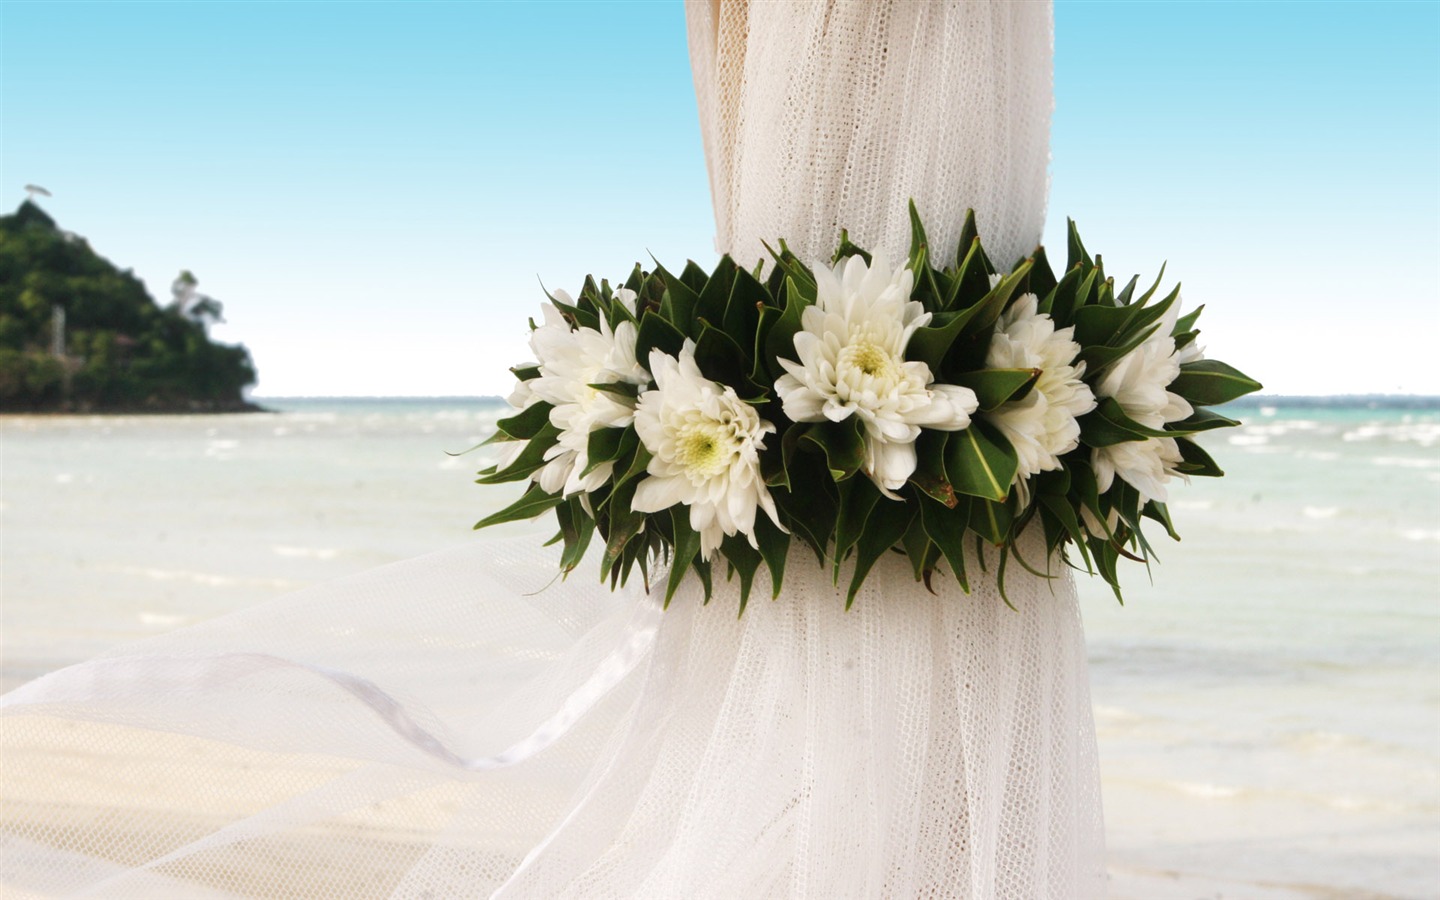 Weddings and Flowers wallpaper (2) #17 - 1440x900